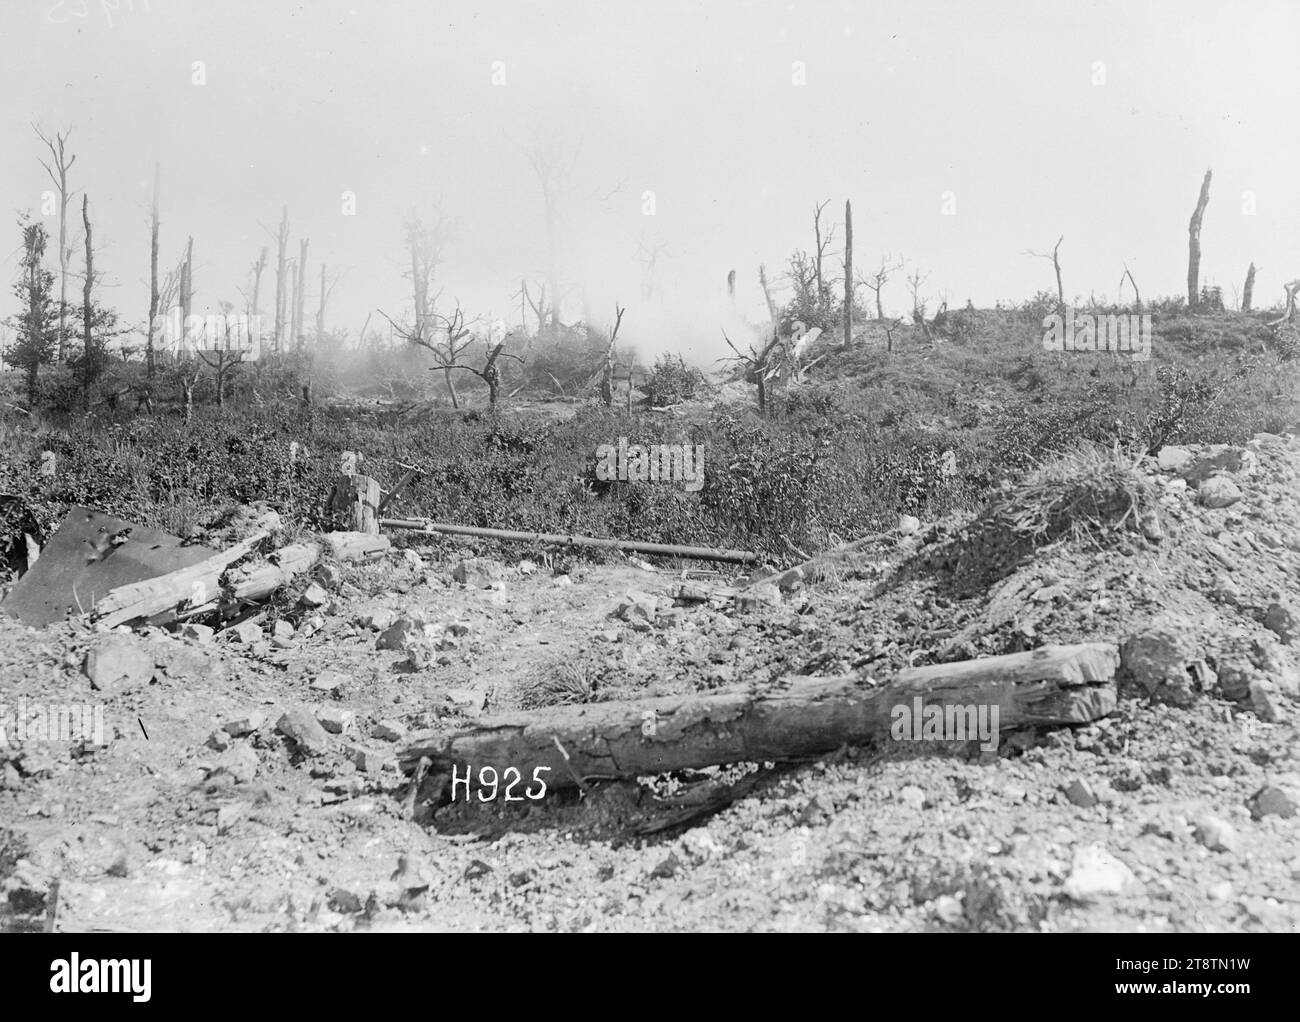 A German dugout burning in World War I, Puisieux, France, A German dugout in a bank burns after the retreating Germans fired the ammunition in it. Shows smoke over mounds of earth and pieces of wood and iron. The trees in the background have been stripped by shelling. Photograph taken Puisieux 21 August 1918 Stock Photo